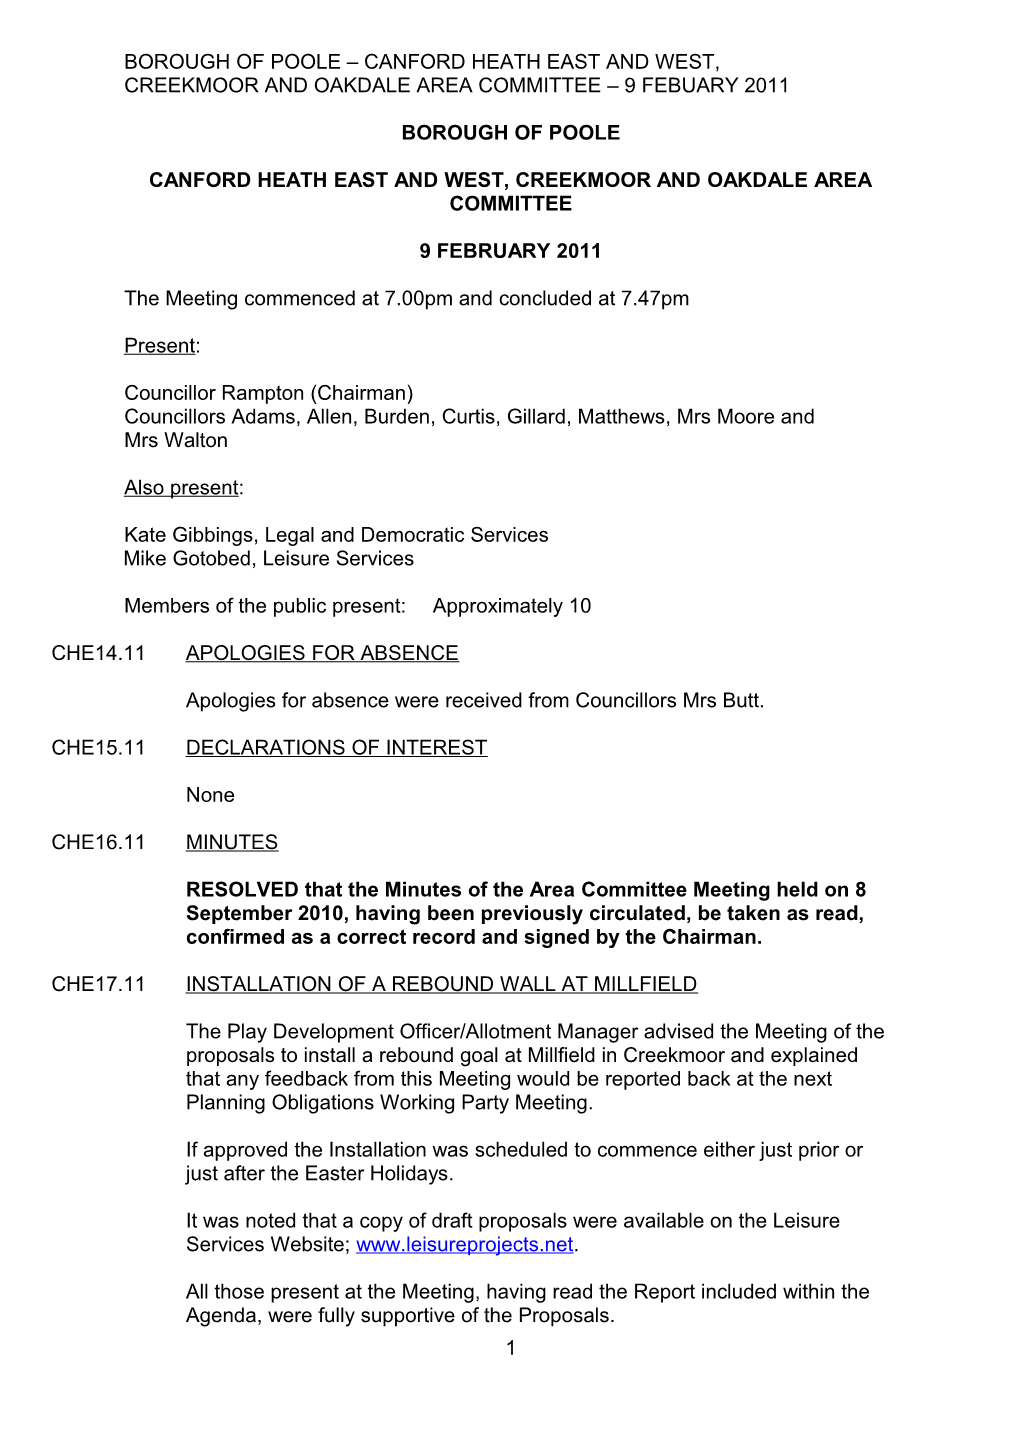 Minutes - Canford Heath East and West, Creekmoor and Oakdale Area Committee - 9 February 2011